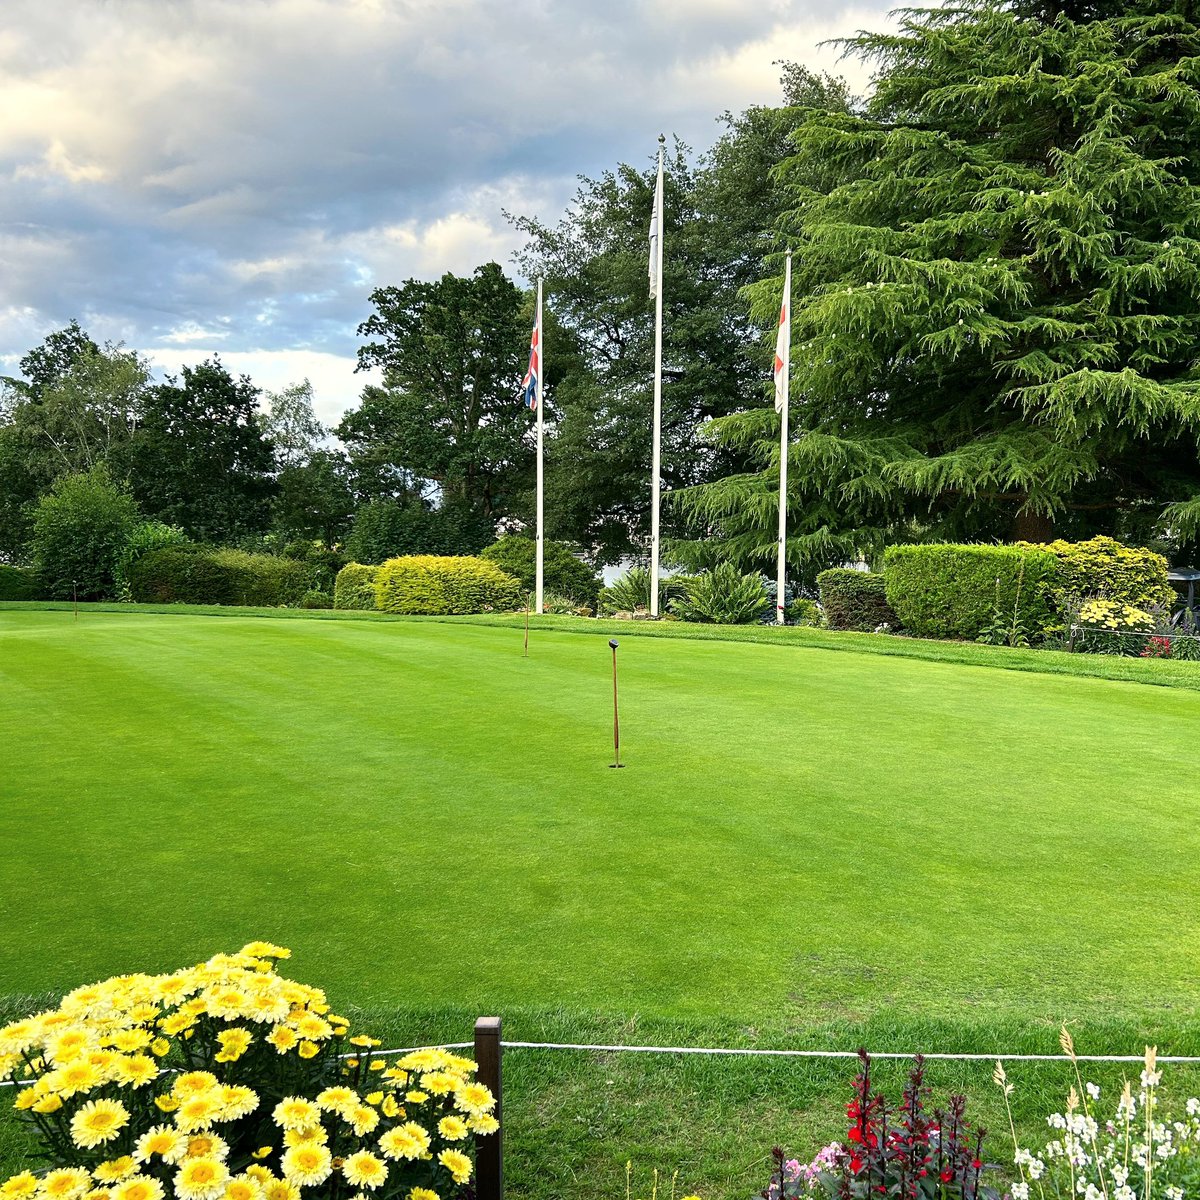 The stage is set…. 🔥 See you all tomorrow for ‘The Northern Cricket Legends Charity Golf Day & BBQ’ at @LifeatMere ! ⛳️🏏🏆 @TheBarmyArmy @AceProgramme Your team, your legends, your rivals- come play’! 🏌️‍♂️ 🏏⛳️🏴󠁧󠁢󠁥󠁮󠁧󠁿